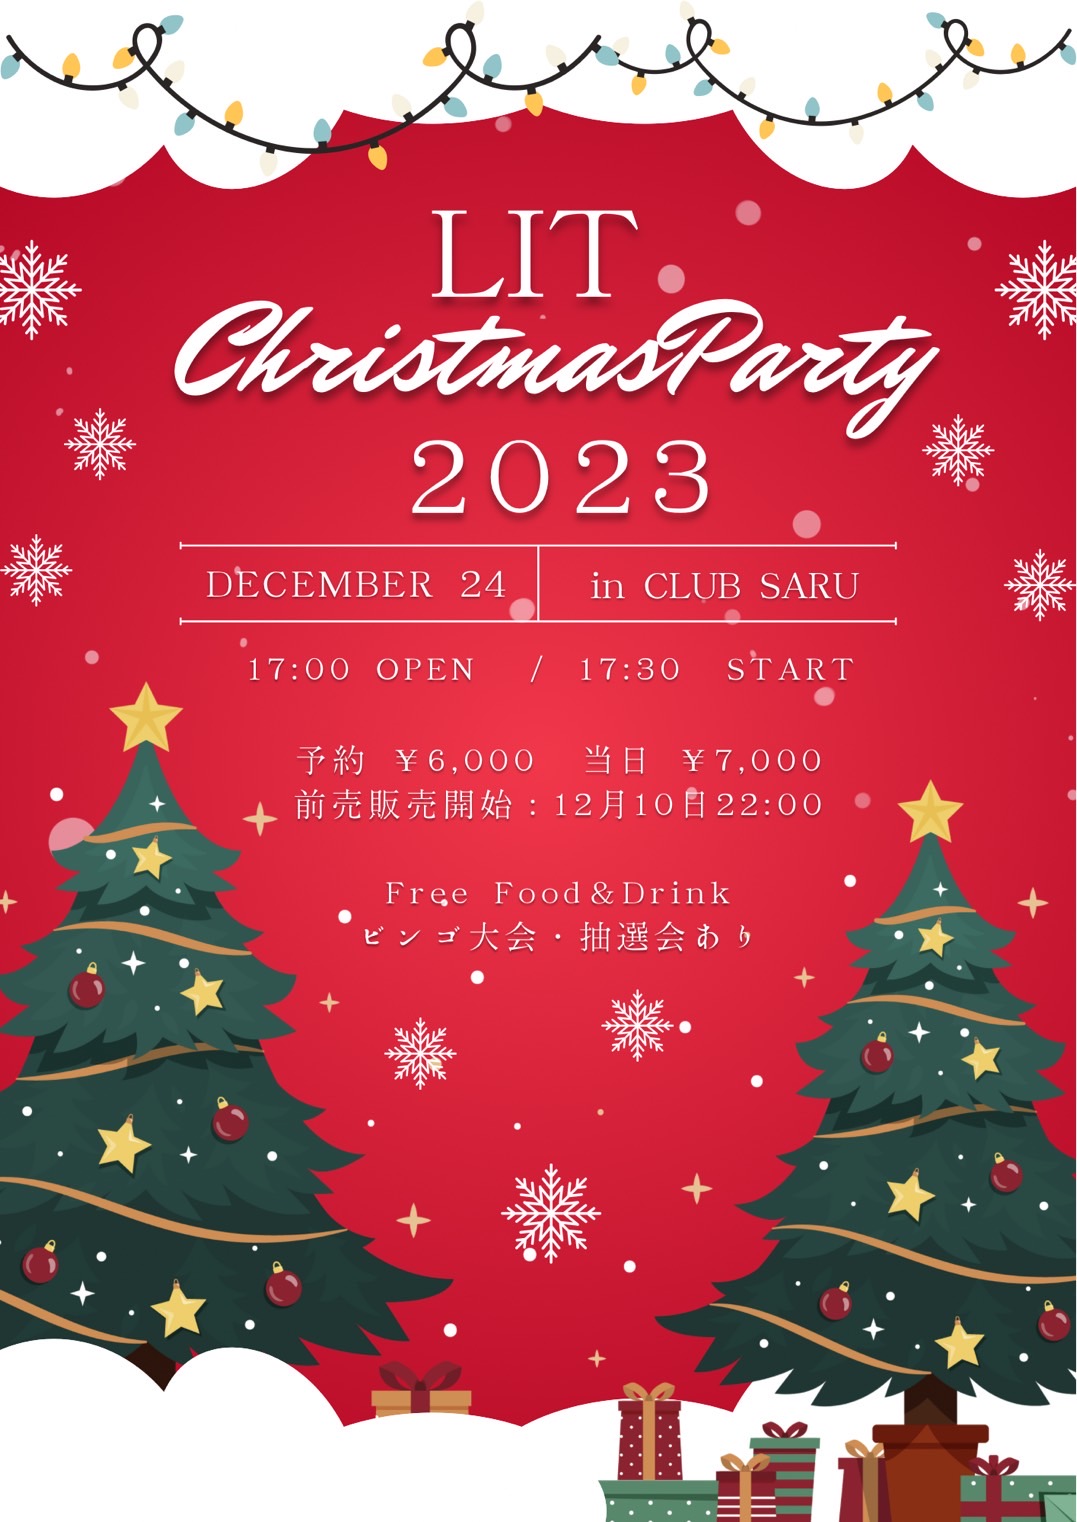 LIT Christmas Party 2023